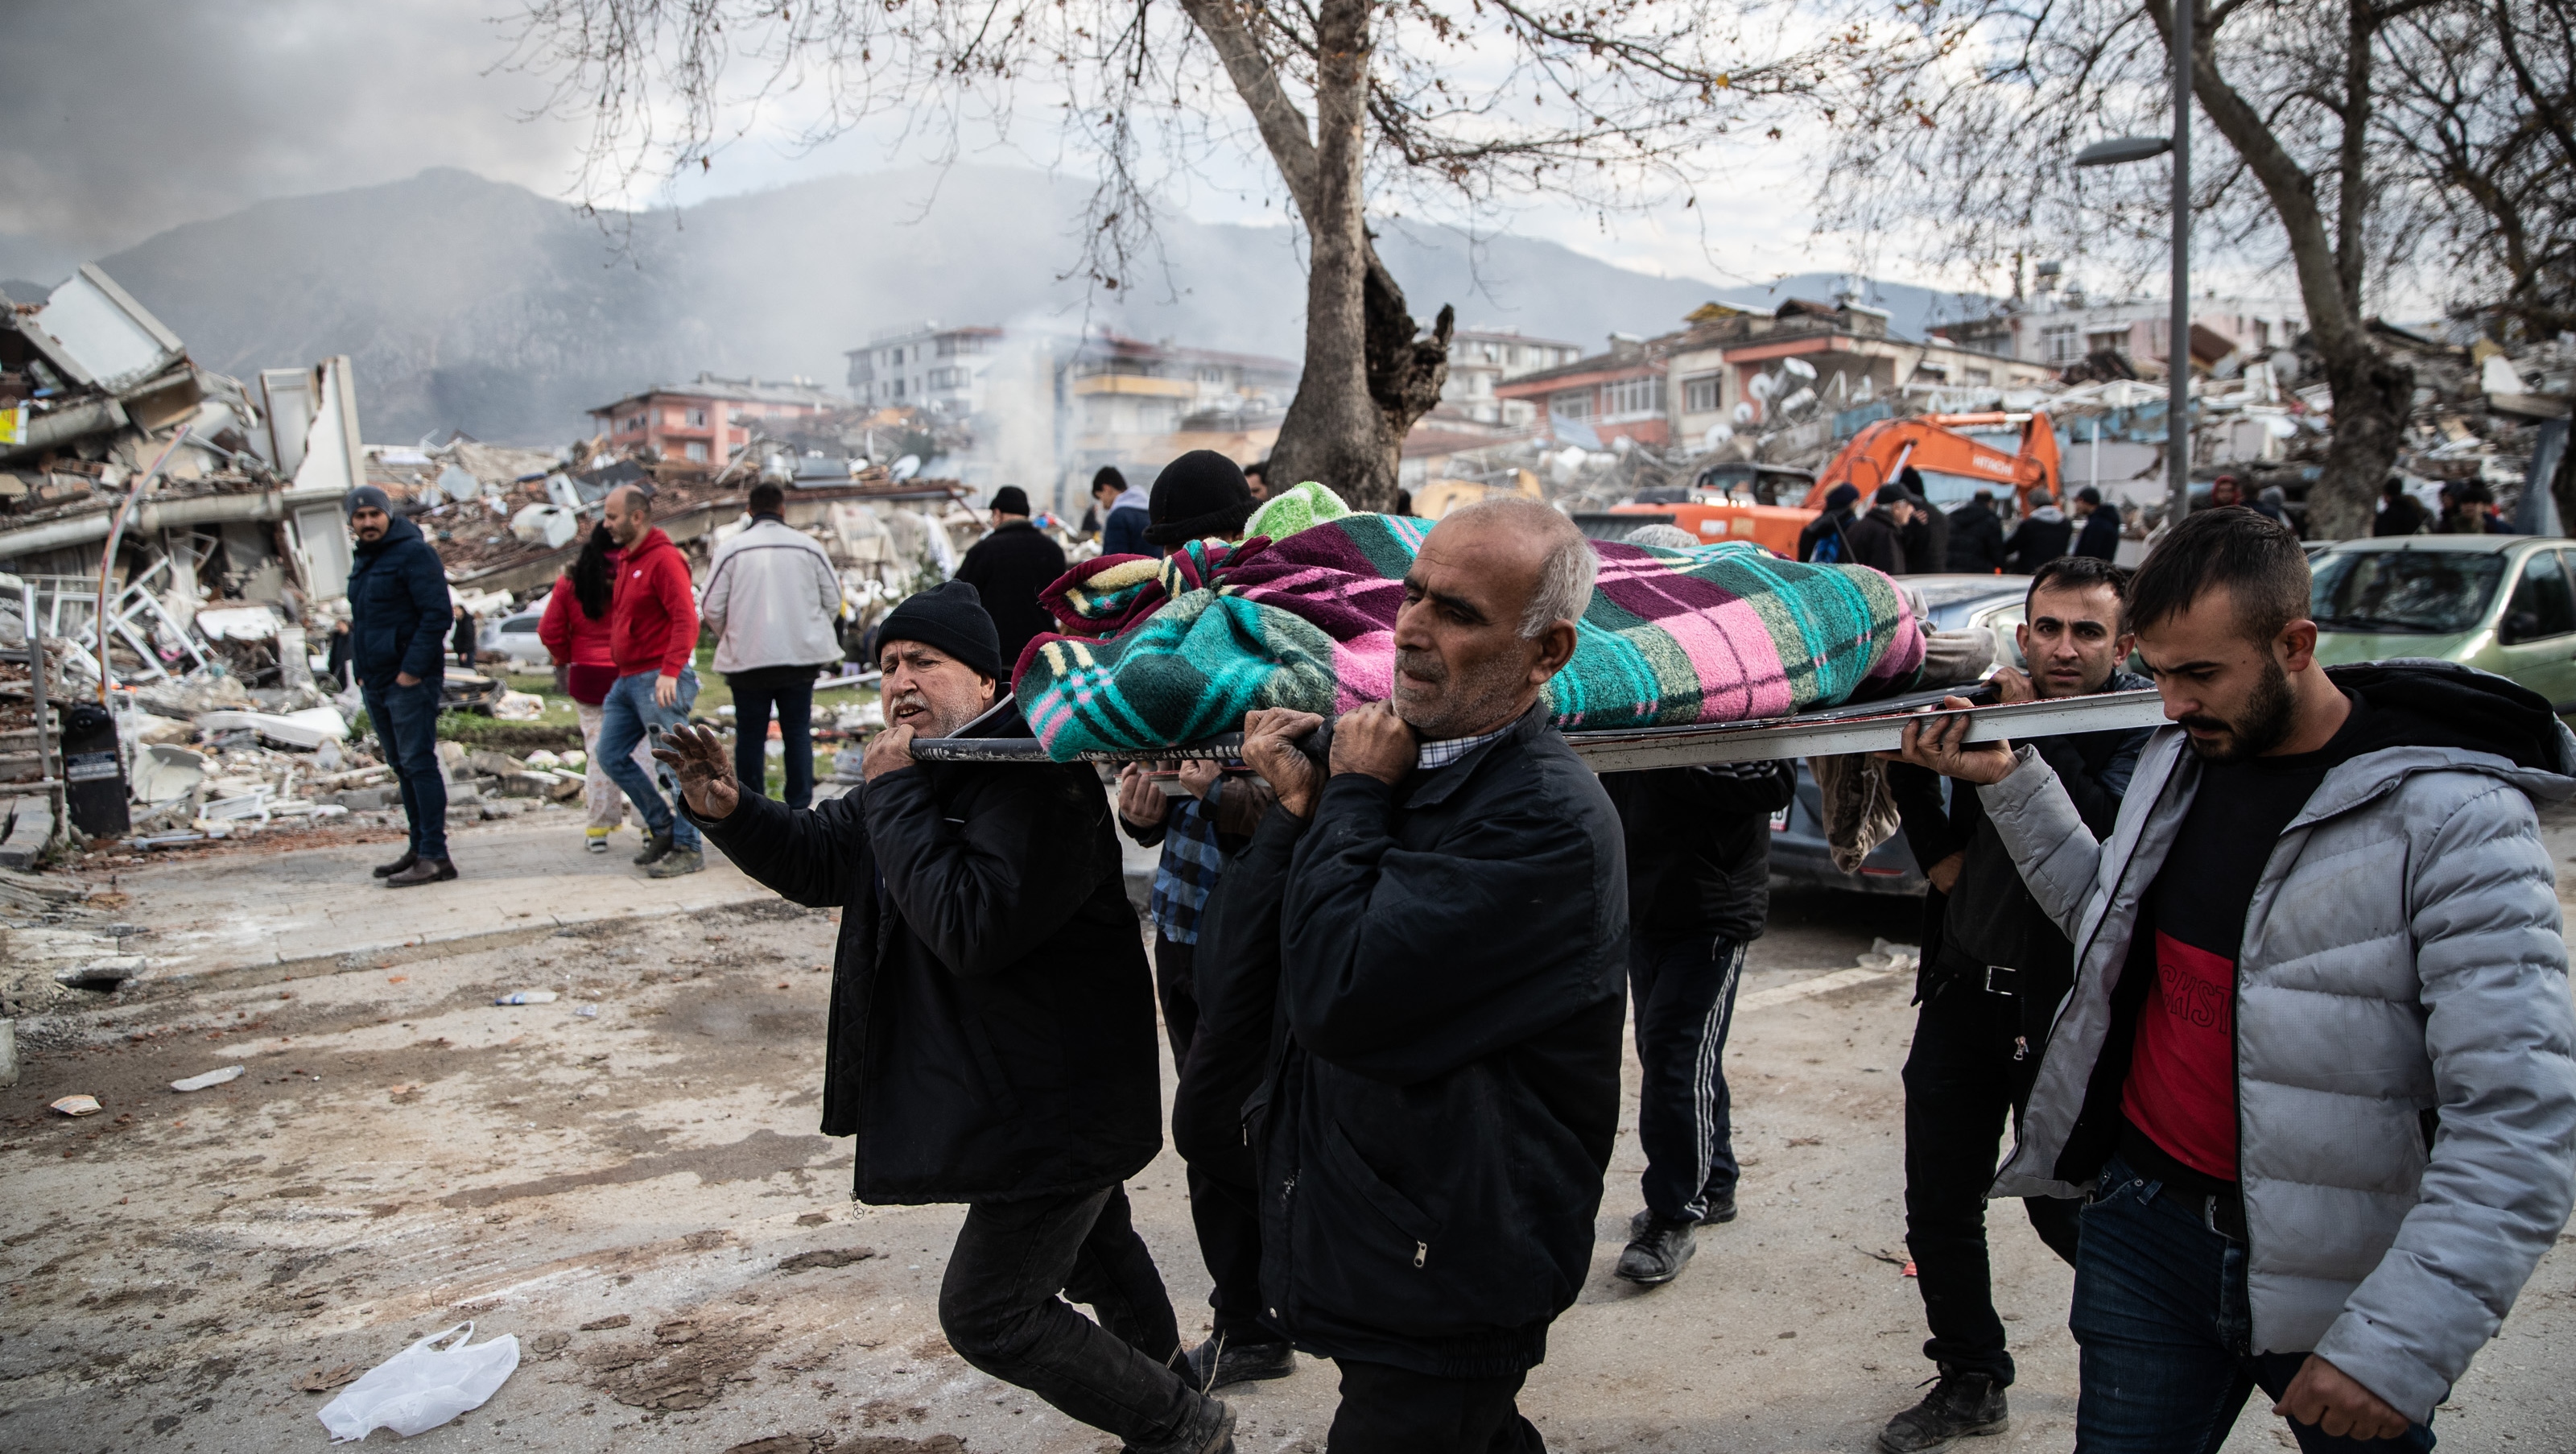 People carry a dead body near the collapsed buildings on February 06, 2023 in Hata, Turkey.